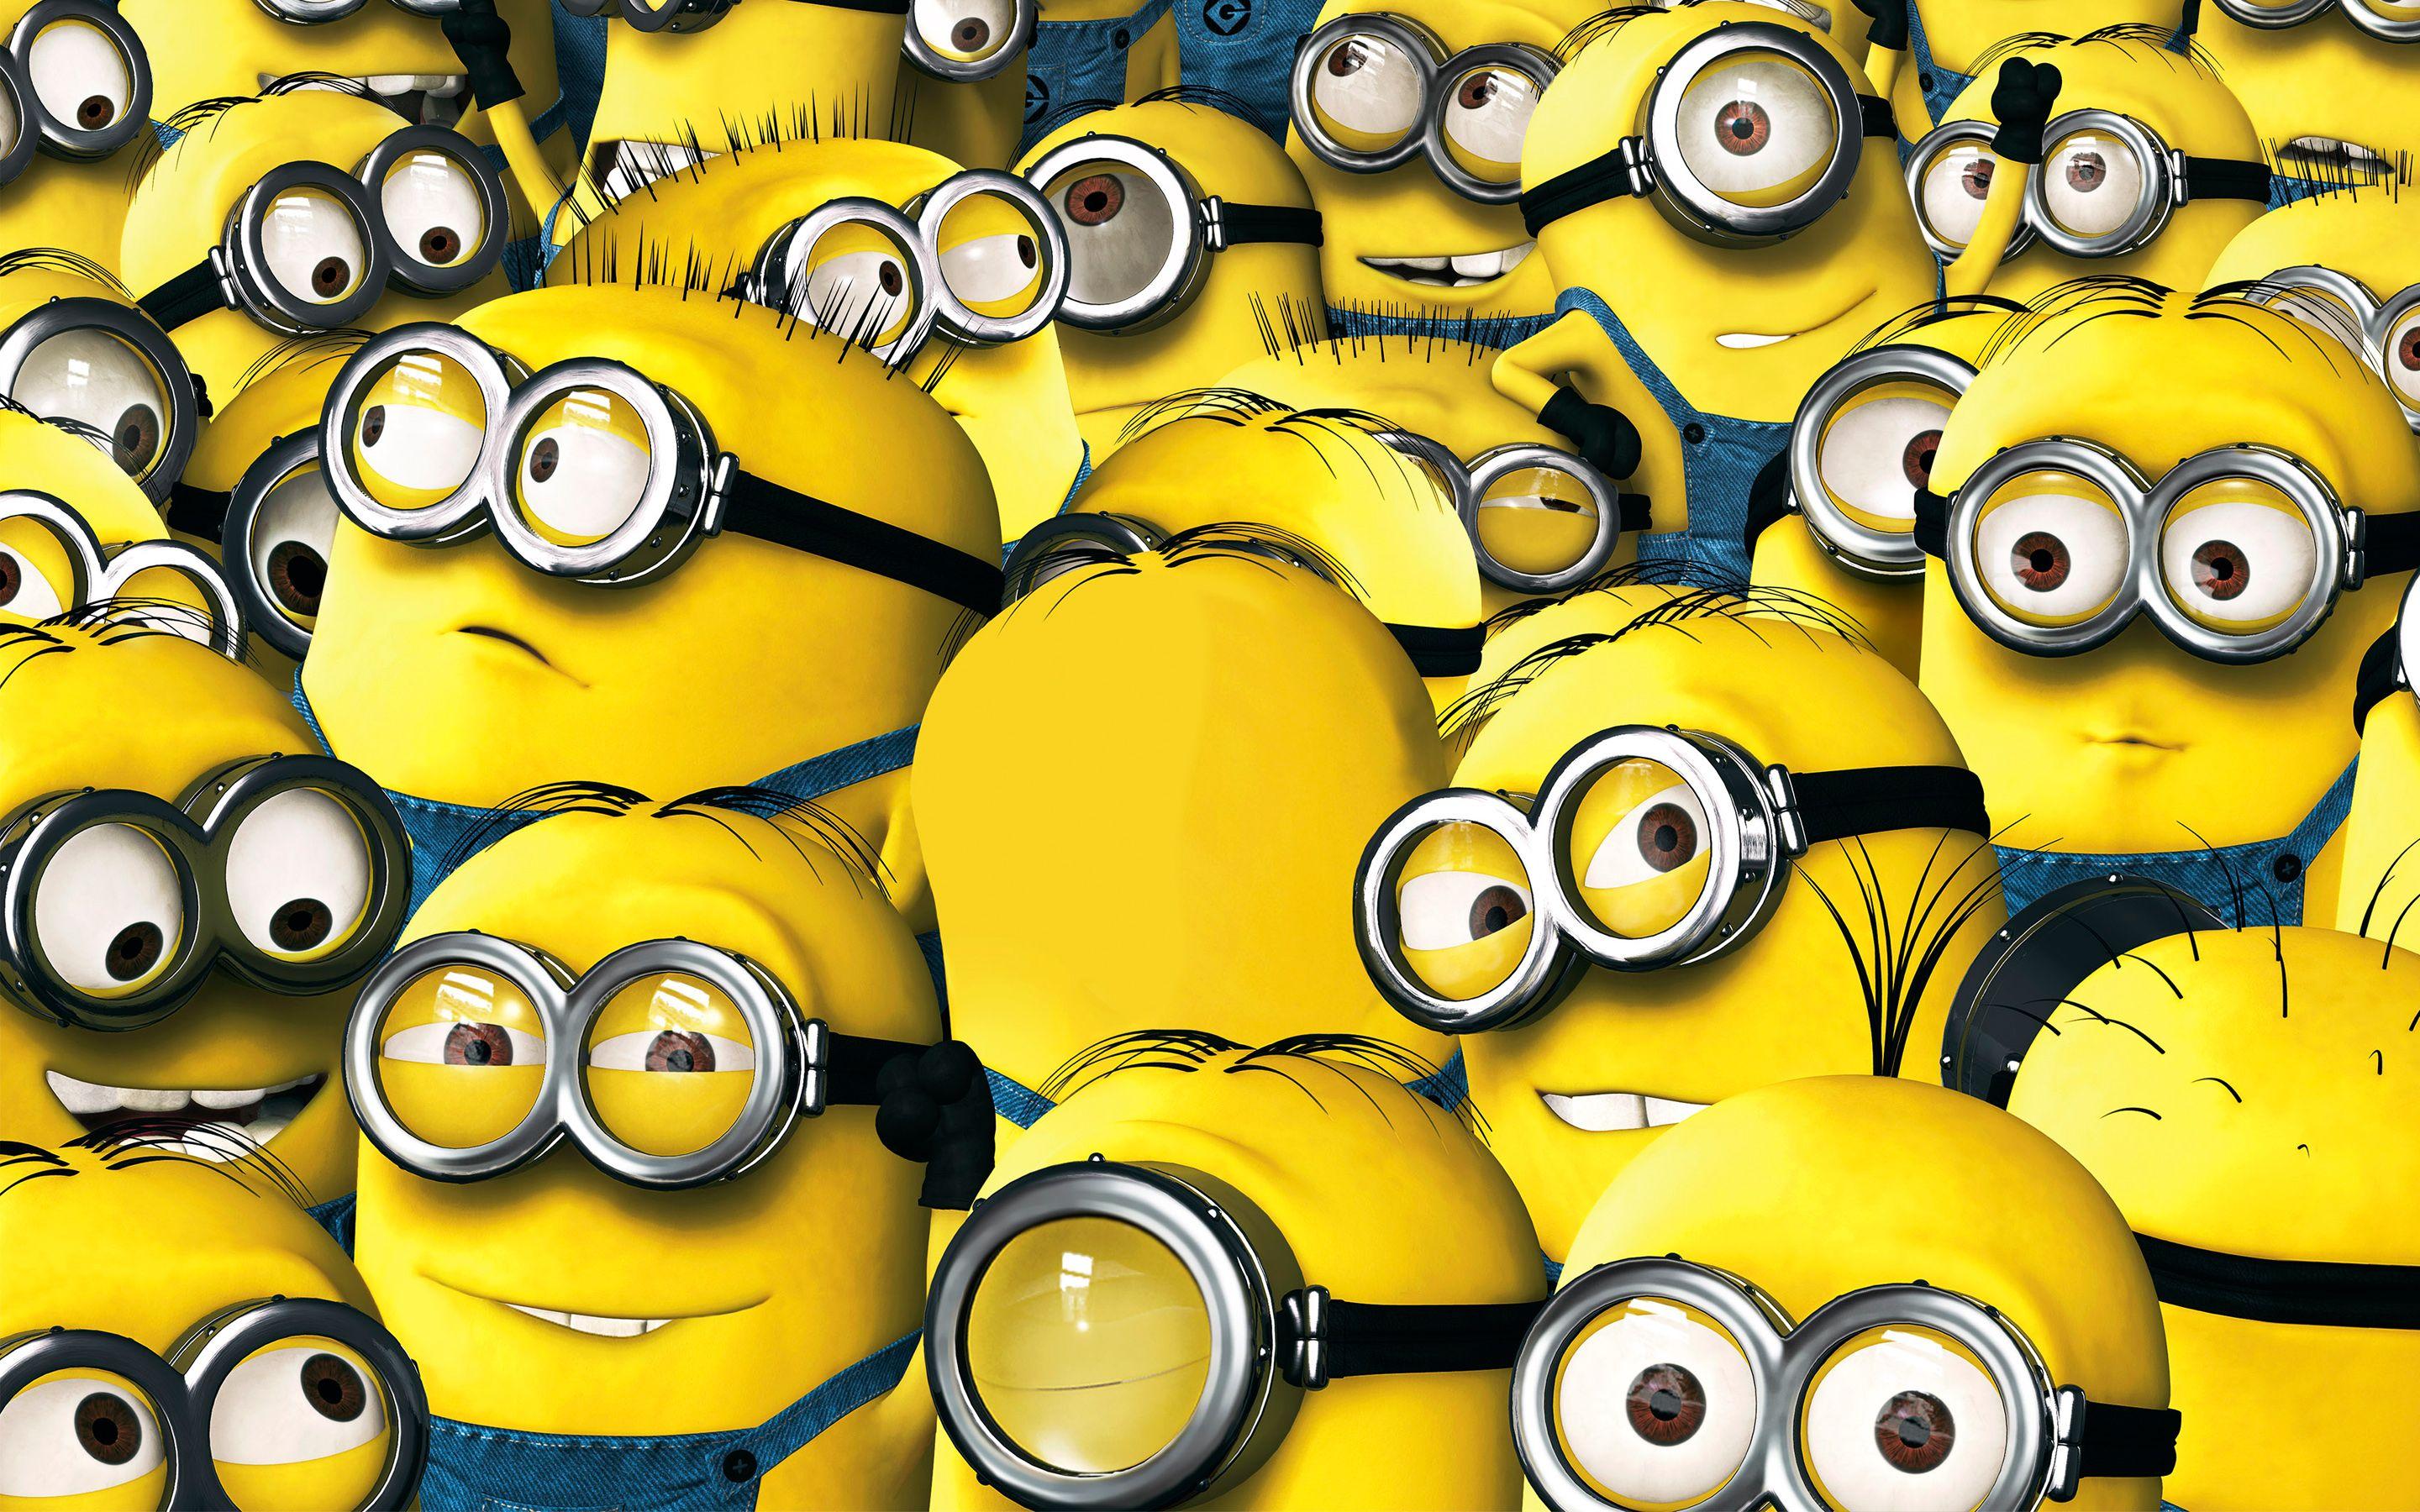 Despicable Me 2 Poster Minion HD Wallpaper, Background Image